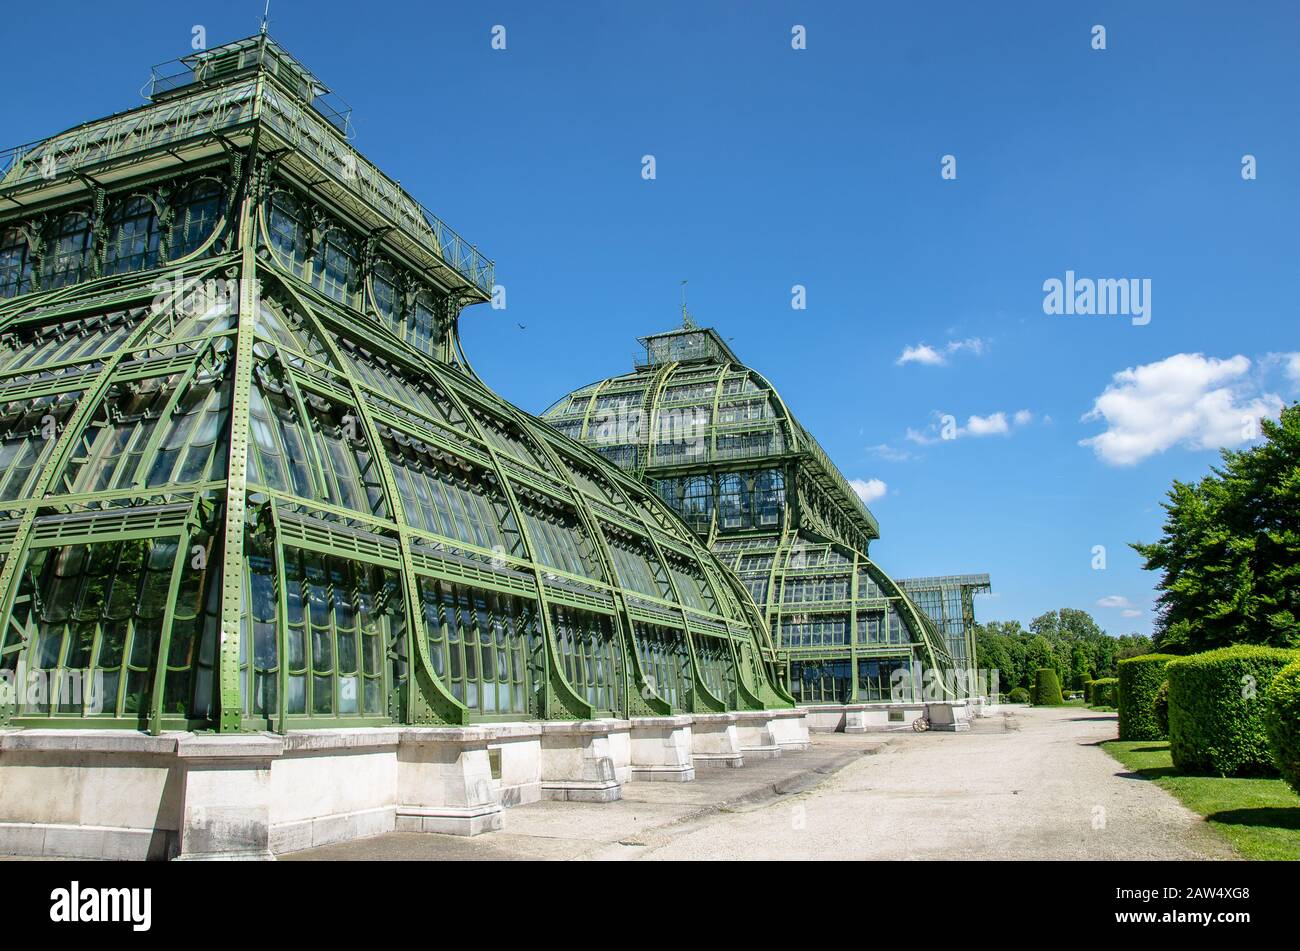 The Palmenhaus Schönbrunn is a large greenhouse in Vienna, It is the most prominent of the four greenhouses in Schönbrunn Palace Park, Stock Photo